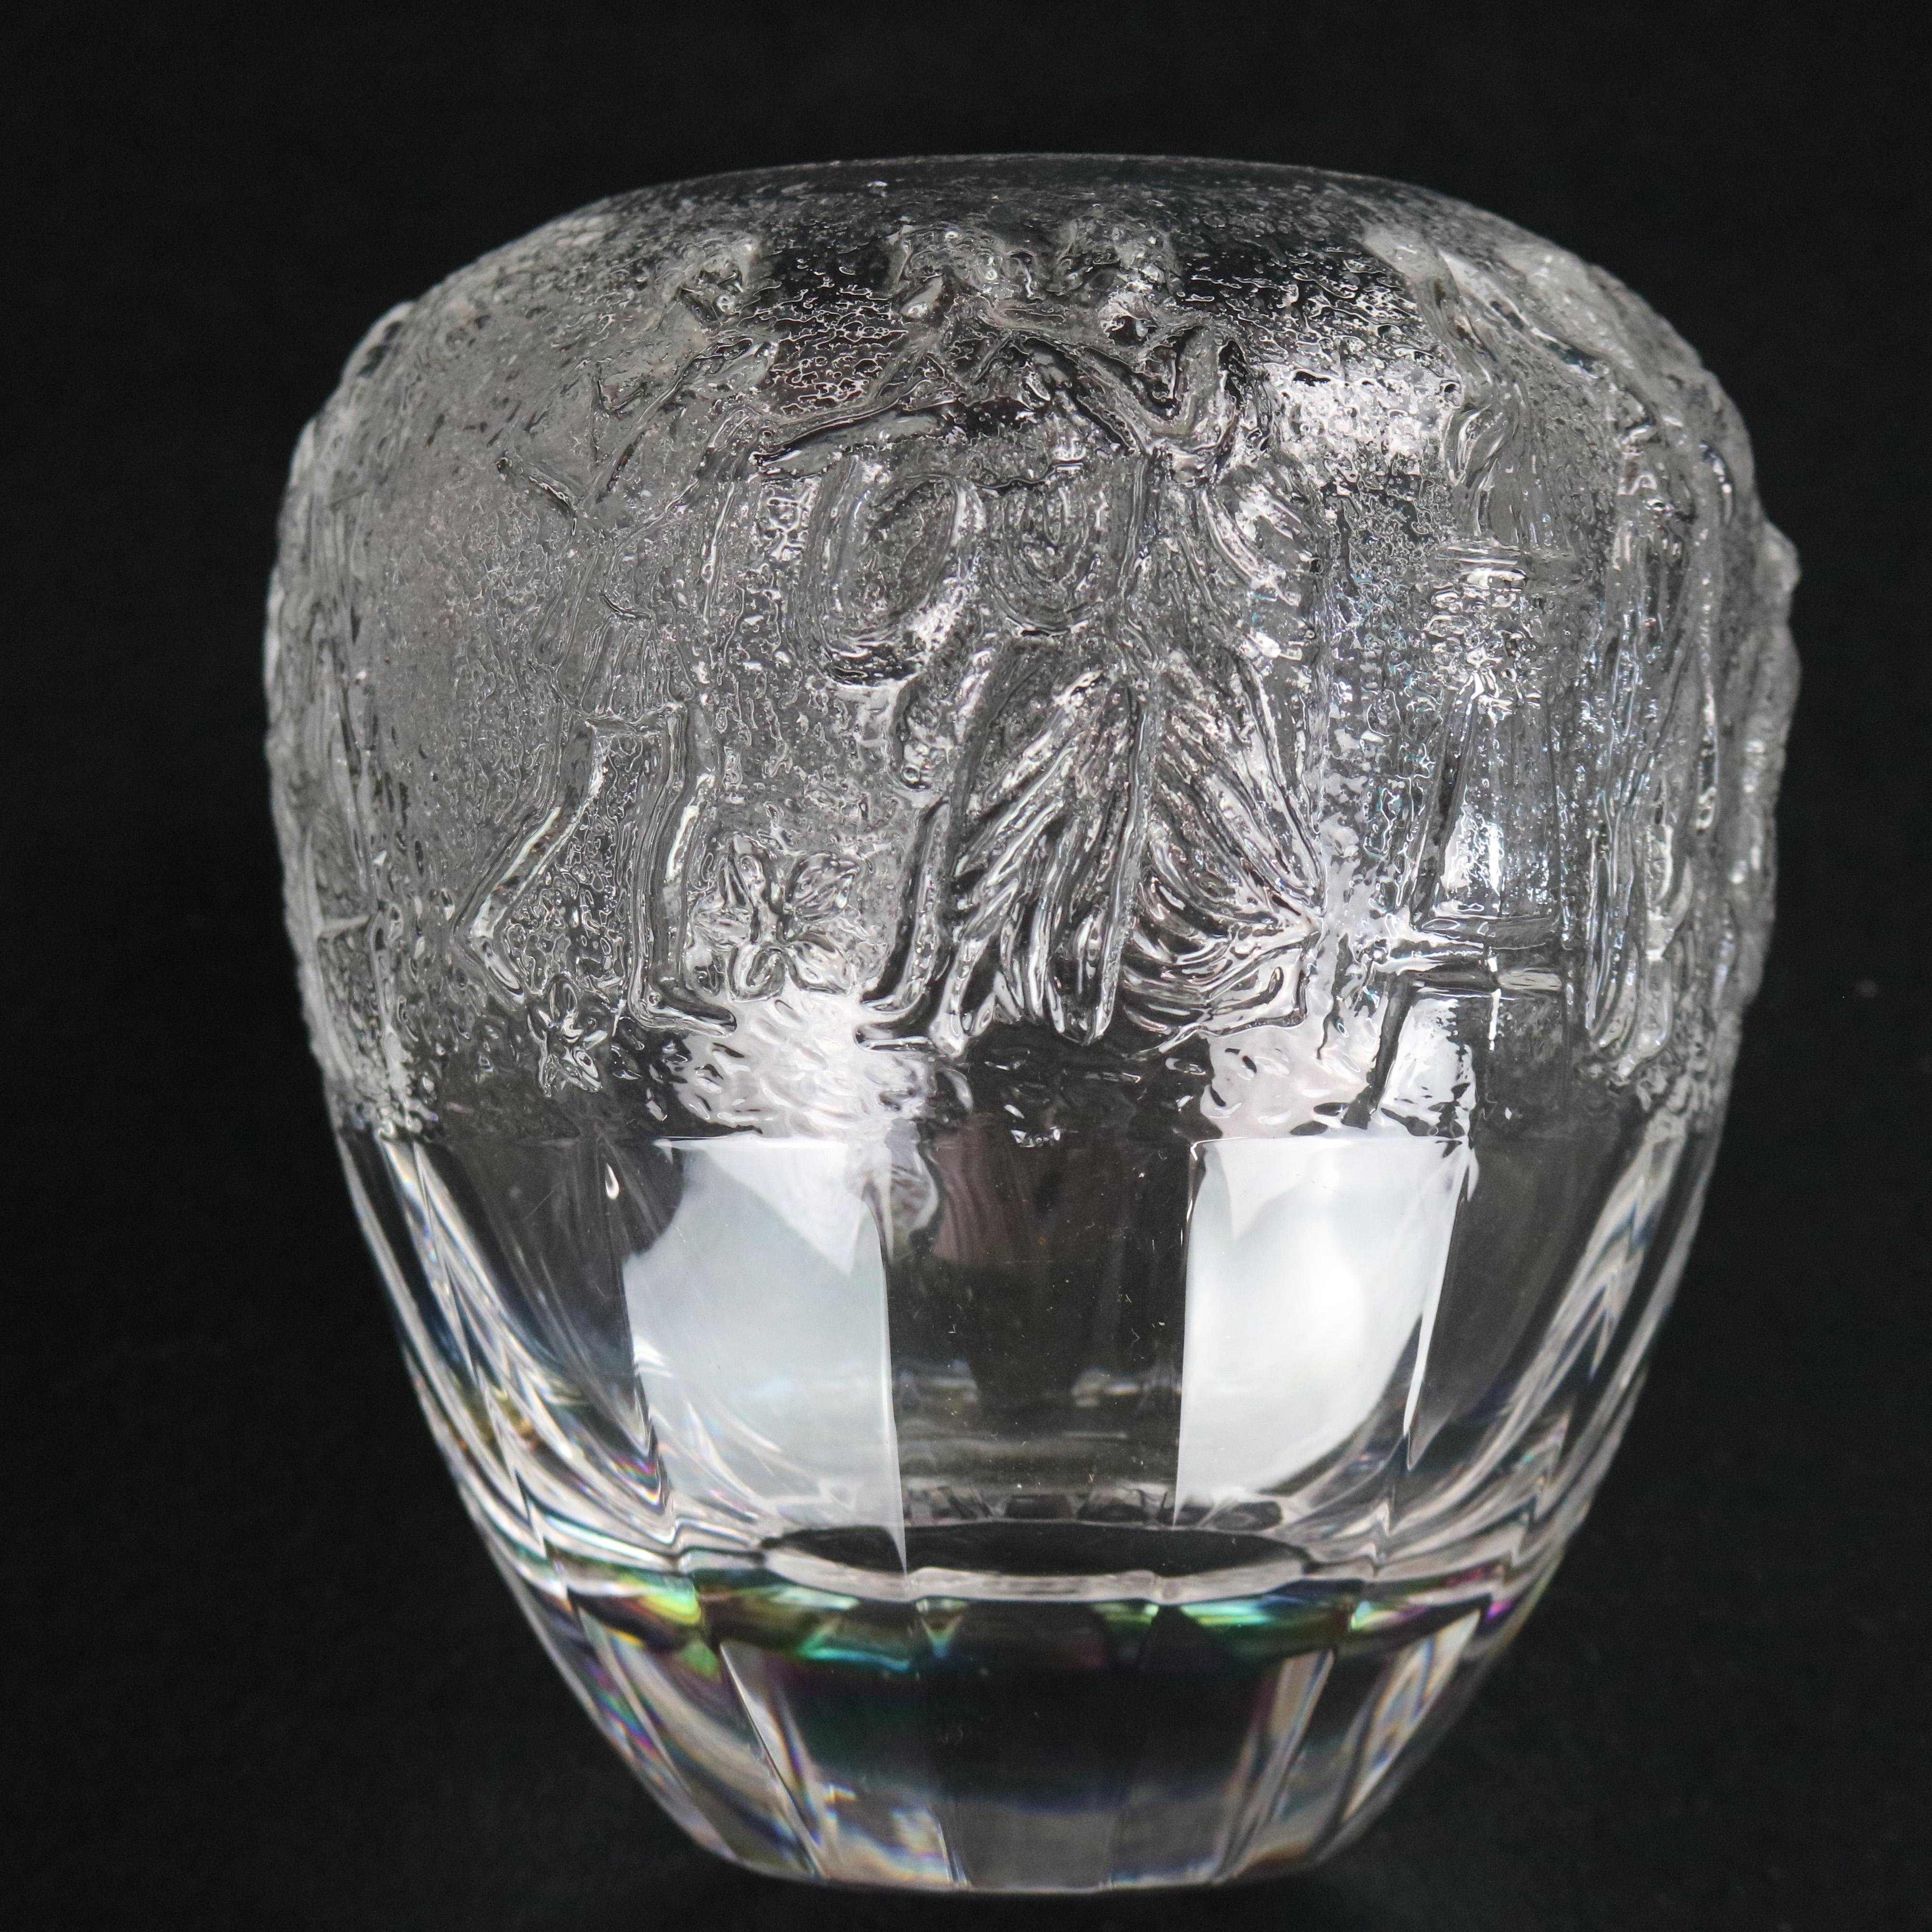 French Vintage High Relief Glass Vase with Figures and Garden Elements, circa 1950